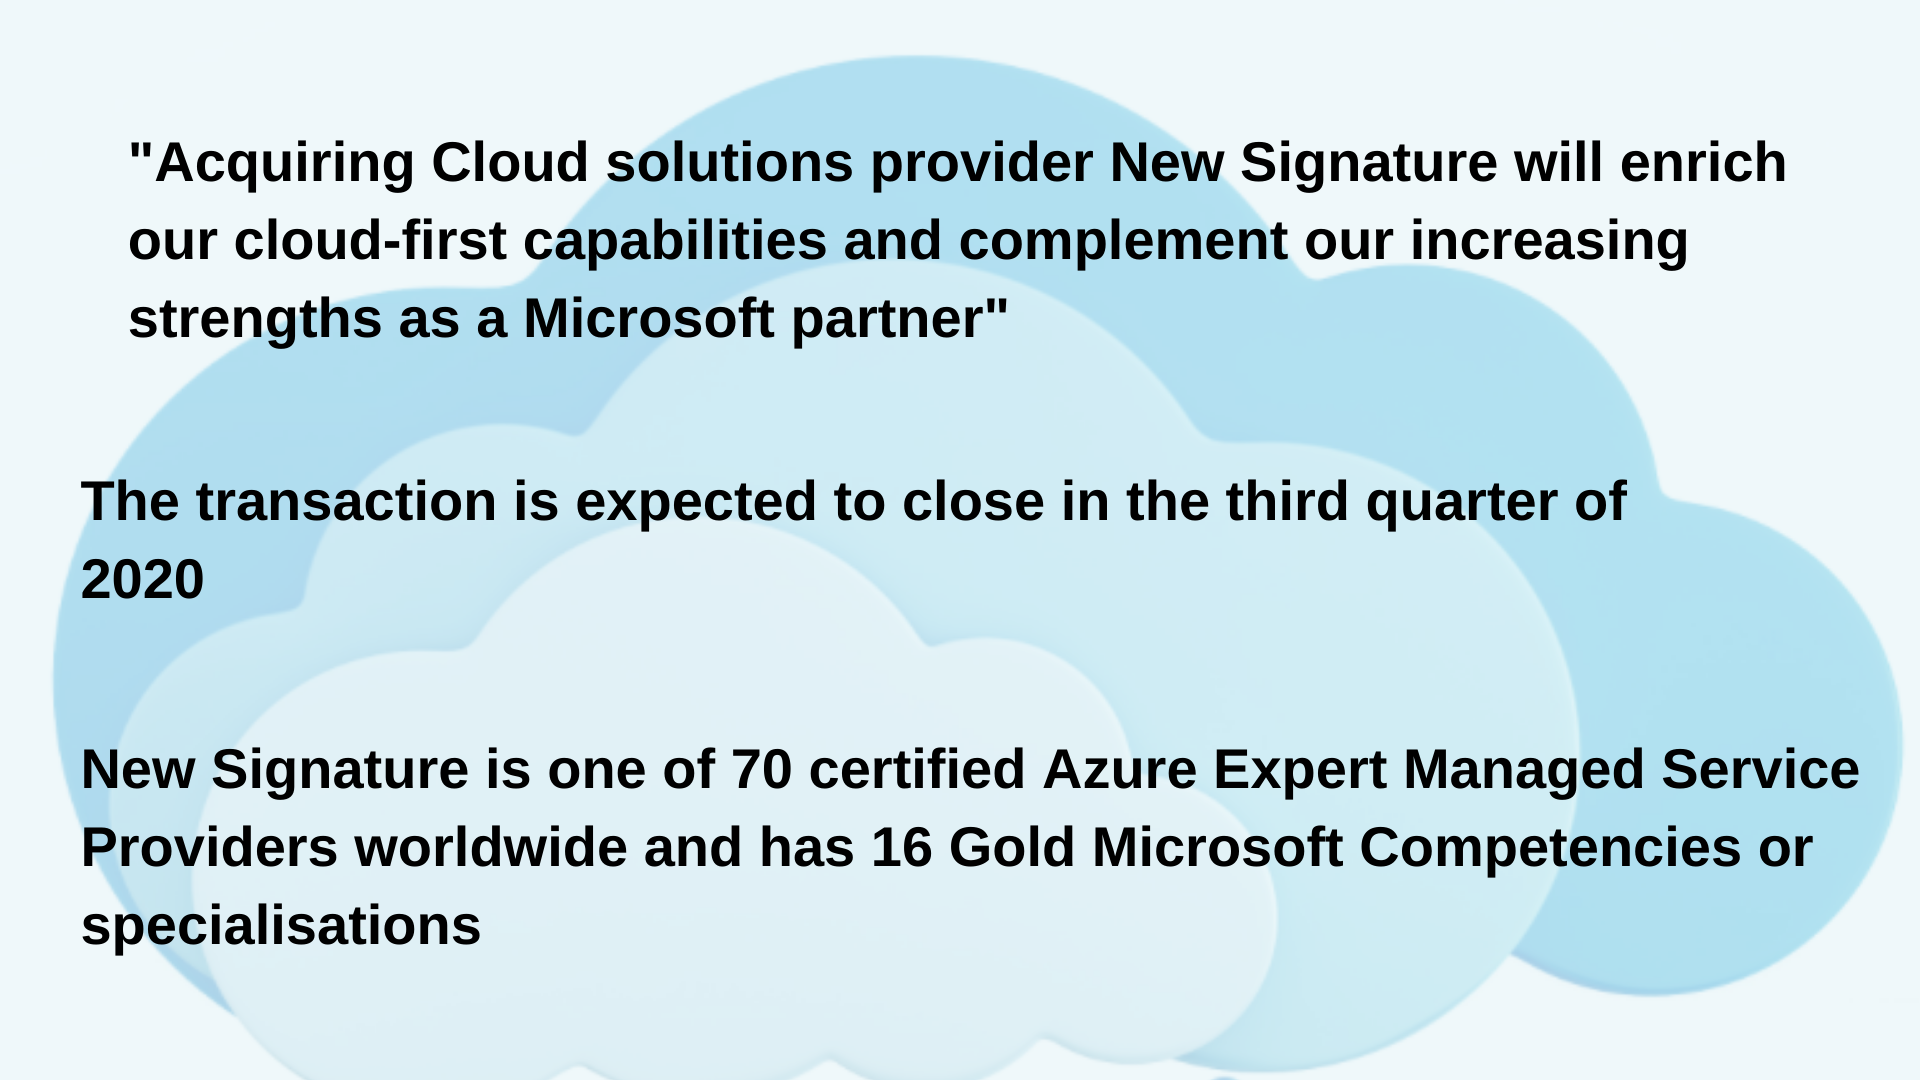 Cognizant's fifth cloud-related acquisition,new signature for newly-formed Microsoft Business Group